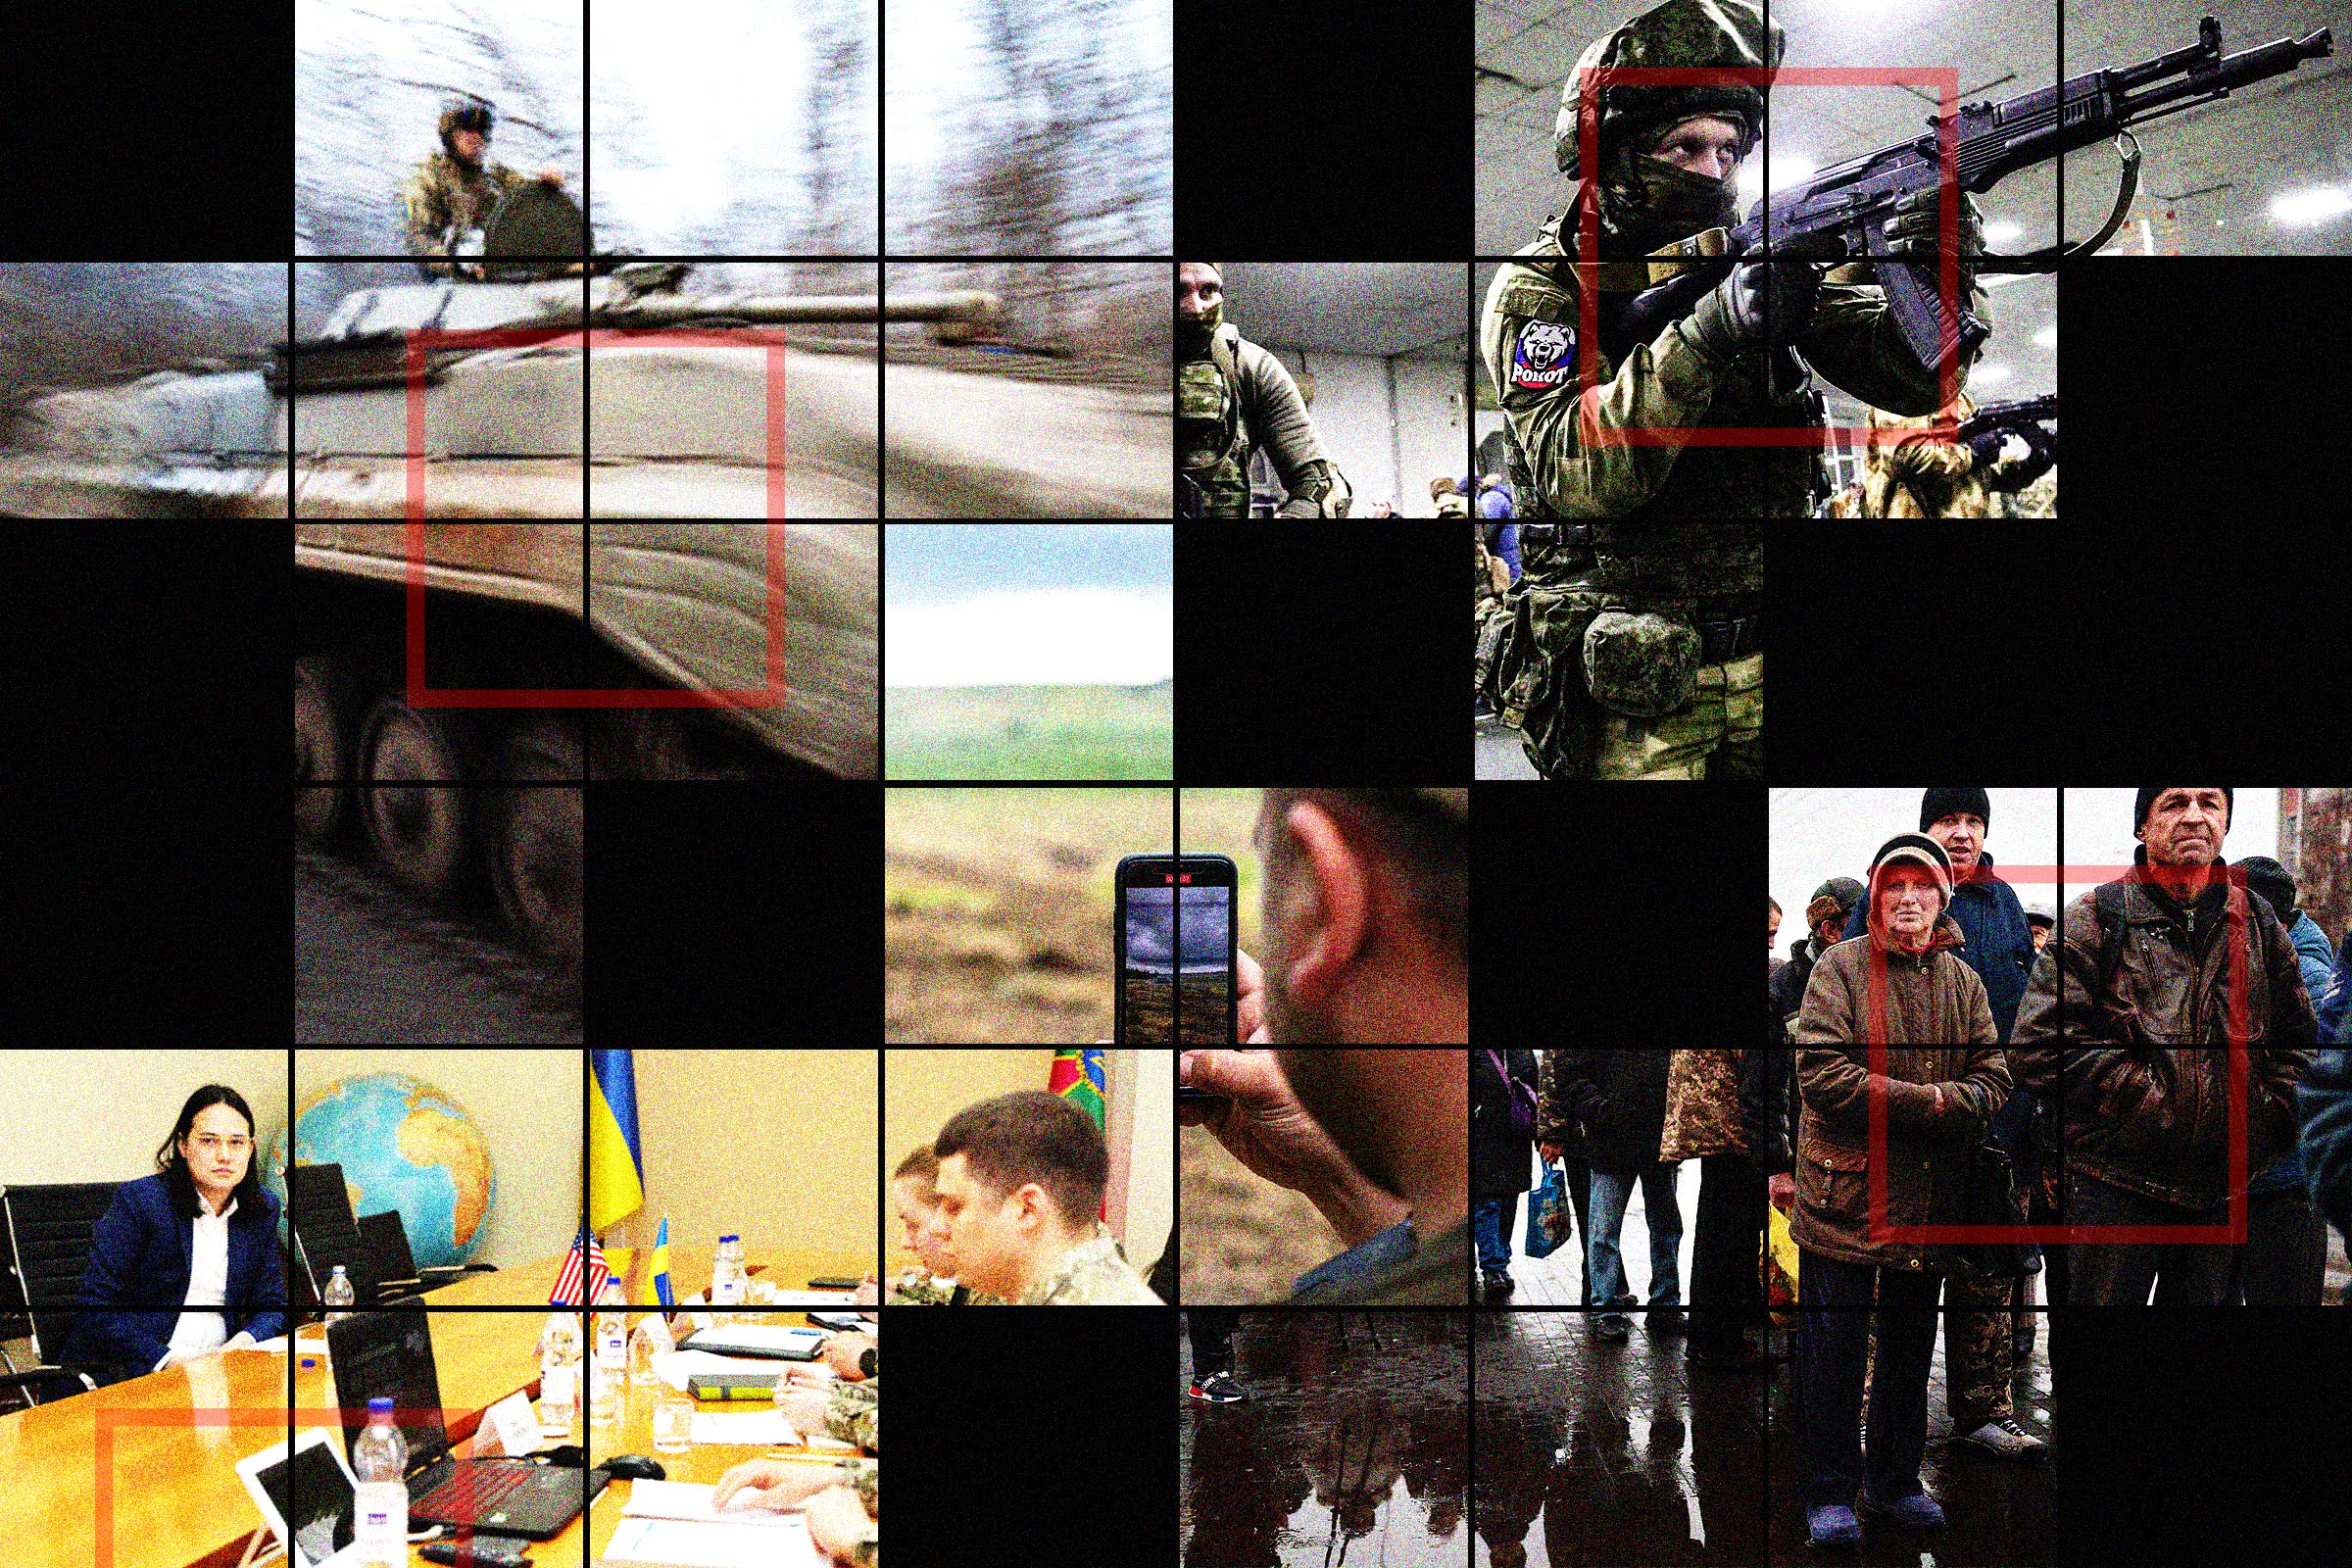 A collage showing Ukrainian Infantry fighting vehicle in Bakhmut, Jan 18.; Russian military volunteers have a military training in Rostov, Dec. 6, 2022; Ukrainian civilians line up to receive food, Chernihiv, Nov. 28, 2022; Ukrainian soldier filming on his phone during a military exercise, June 27; Clearview AI CEO Hoan Ton-That and Ukrainian Military officials